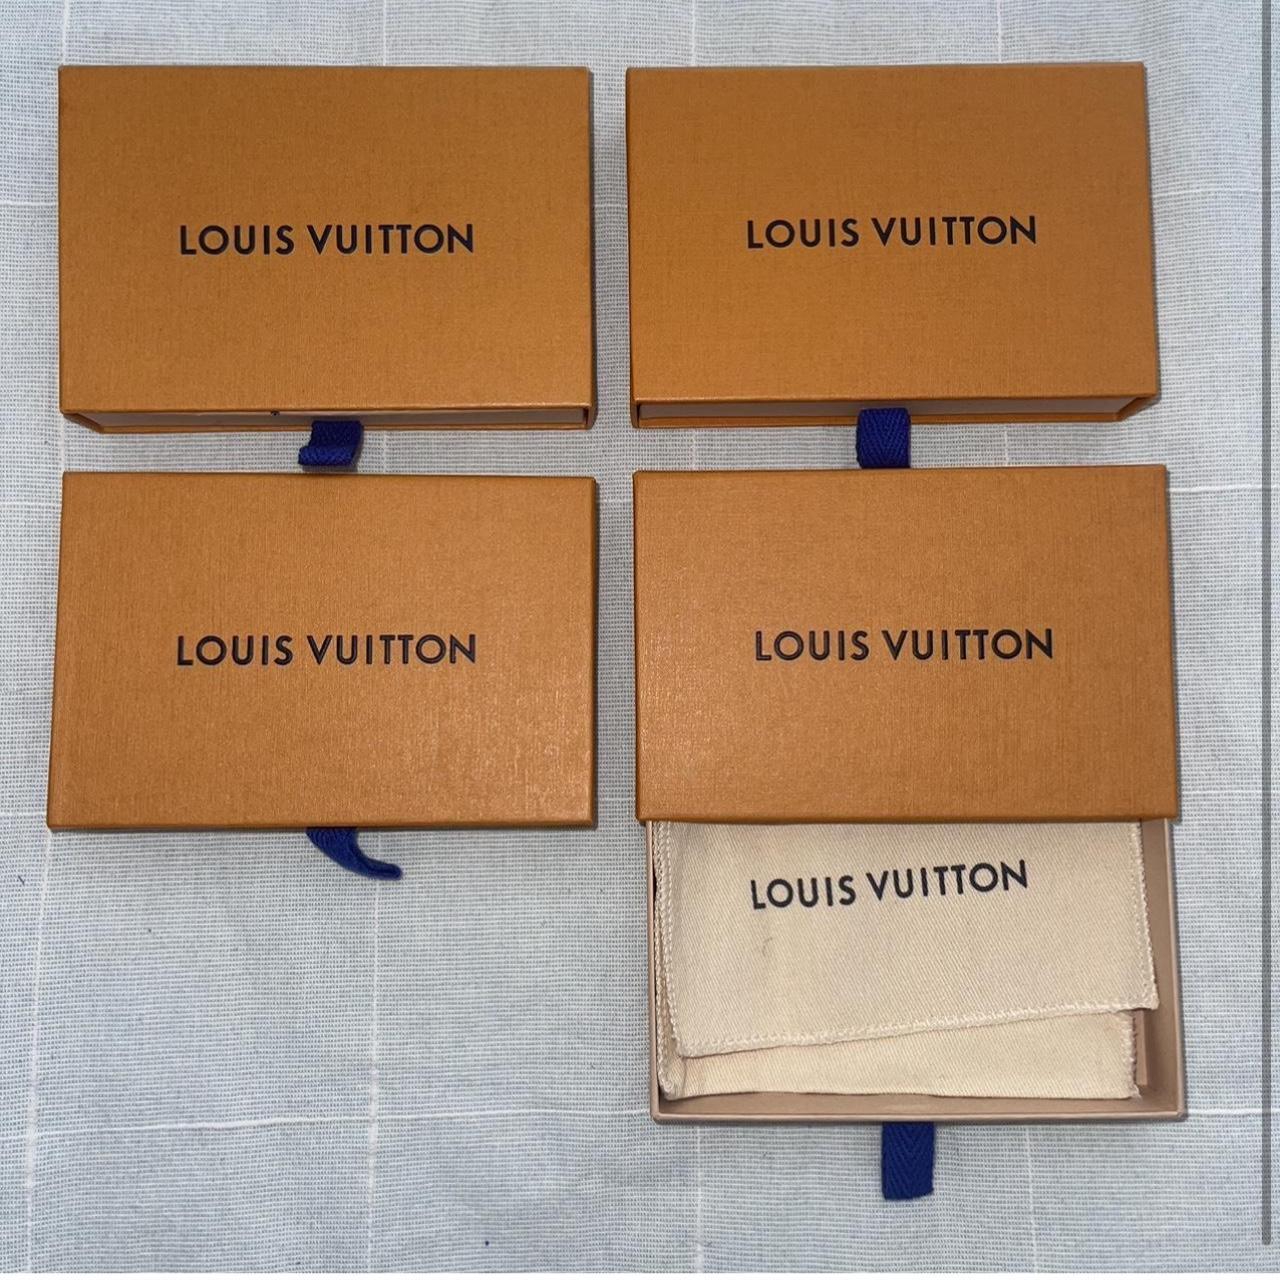 Louis Vuitton small jewellery/ SLG boxes $40 for 3x... - Depop